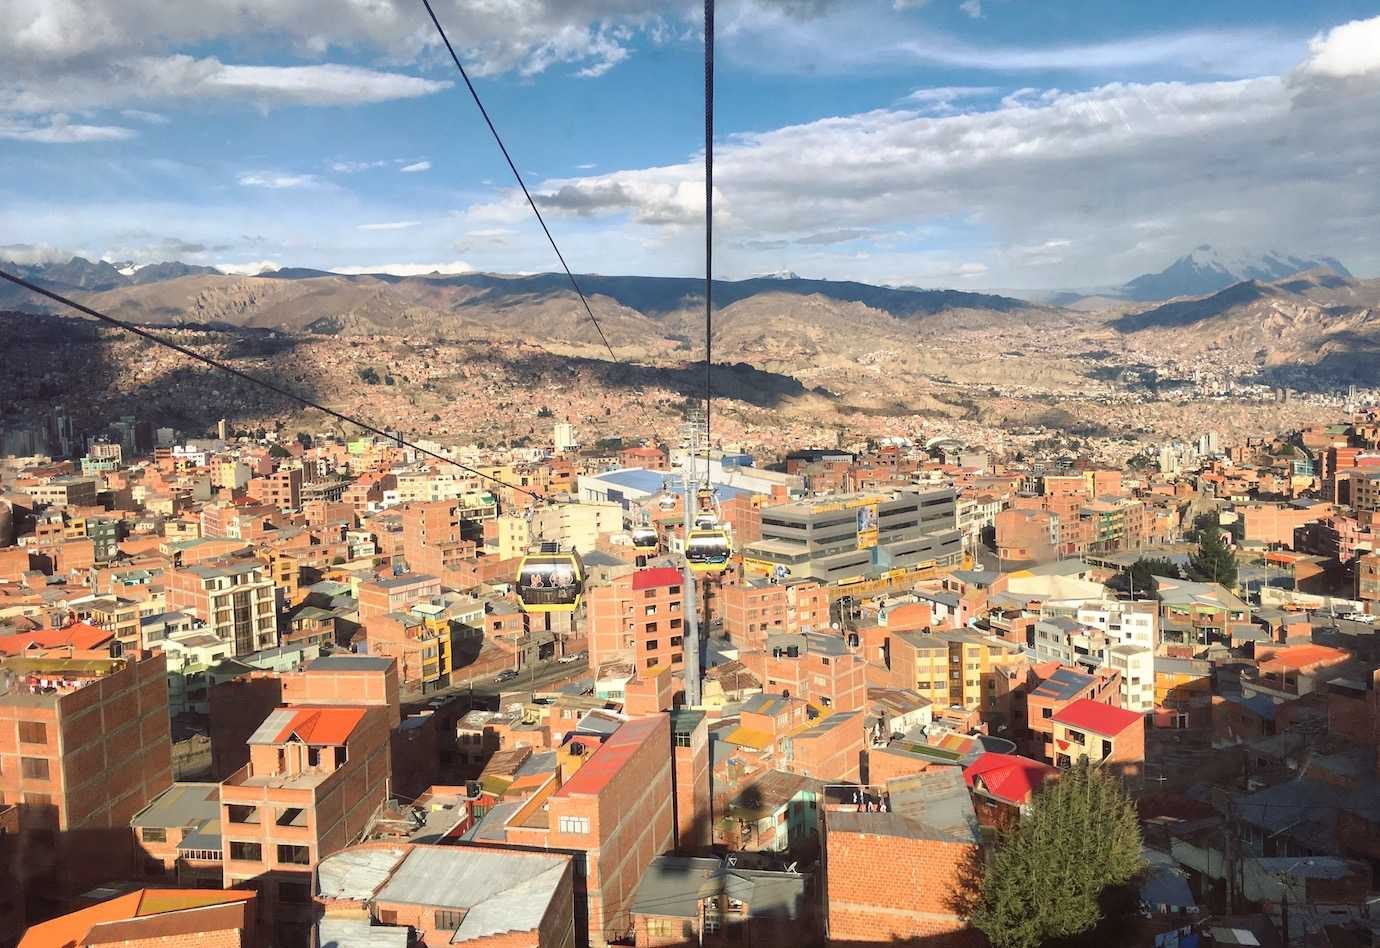 Things to do in La Paz. Cable Car views